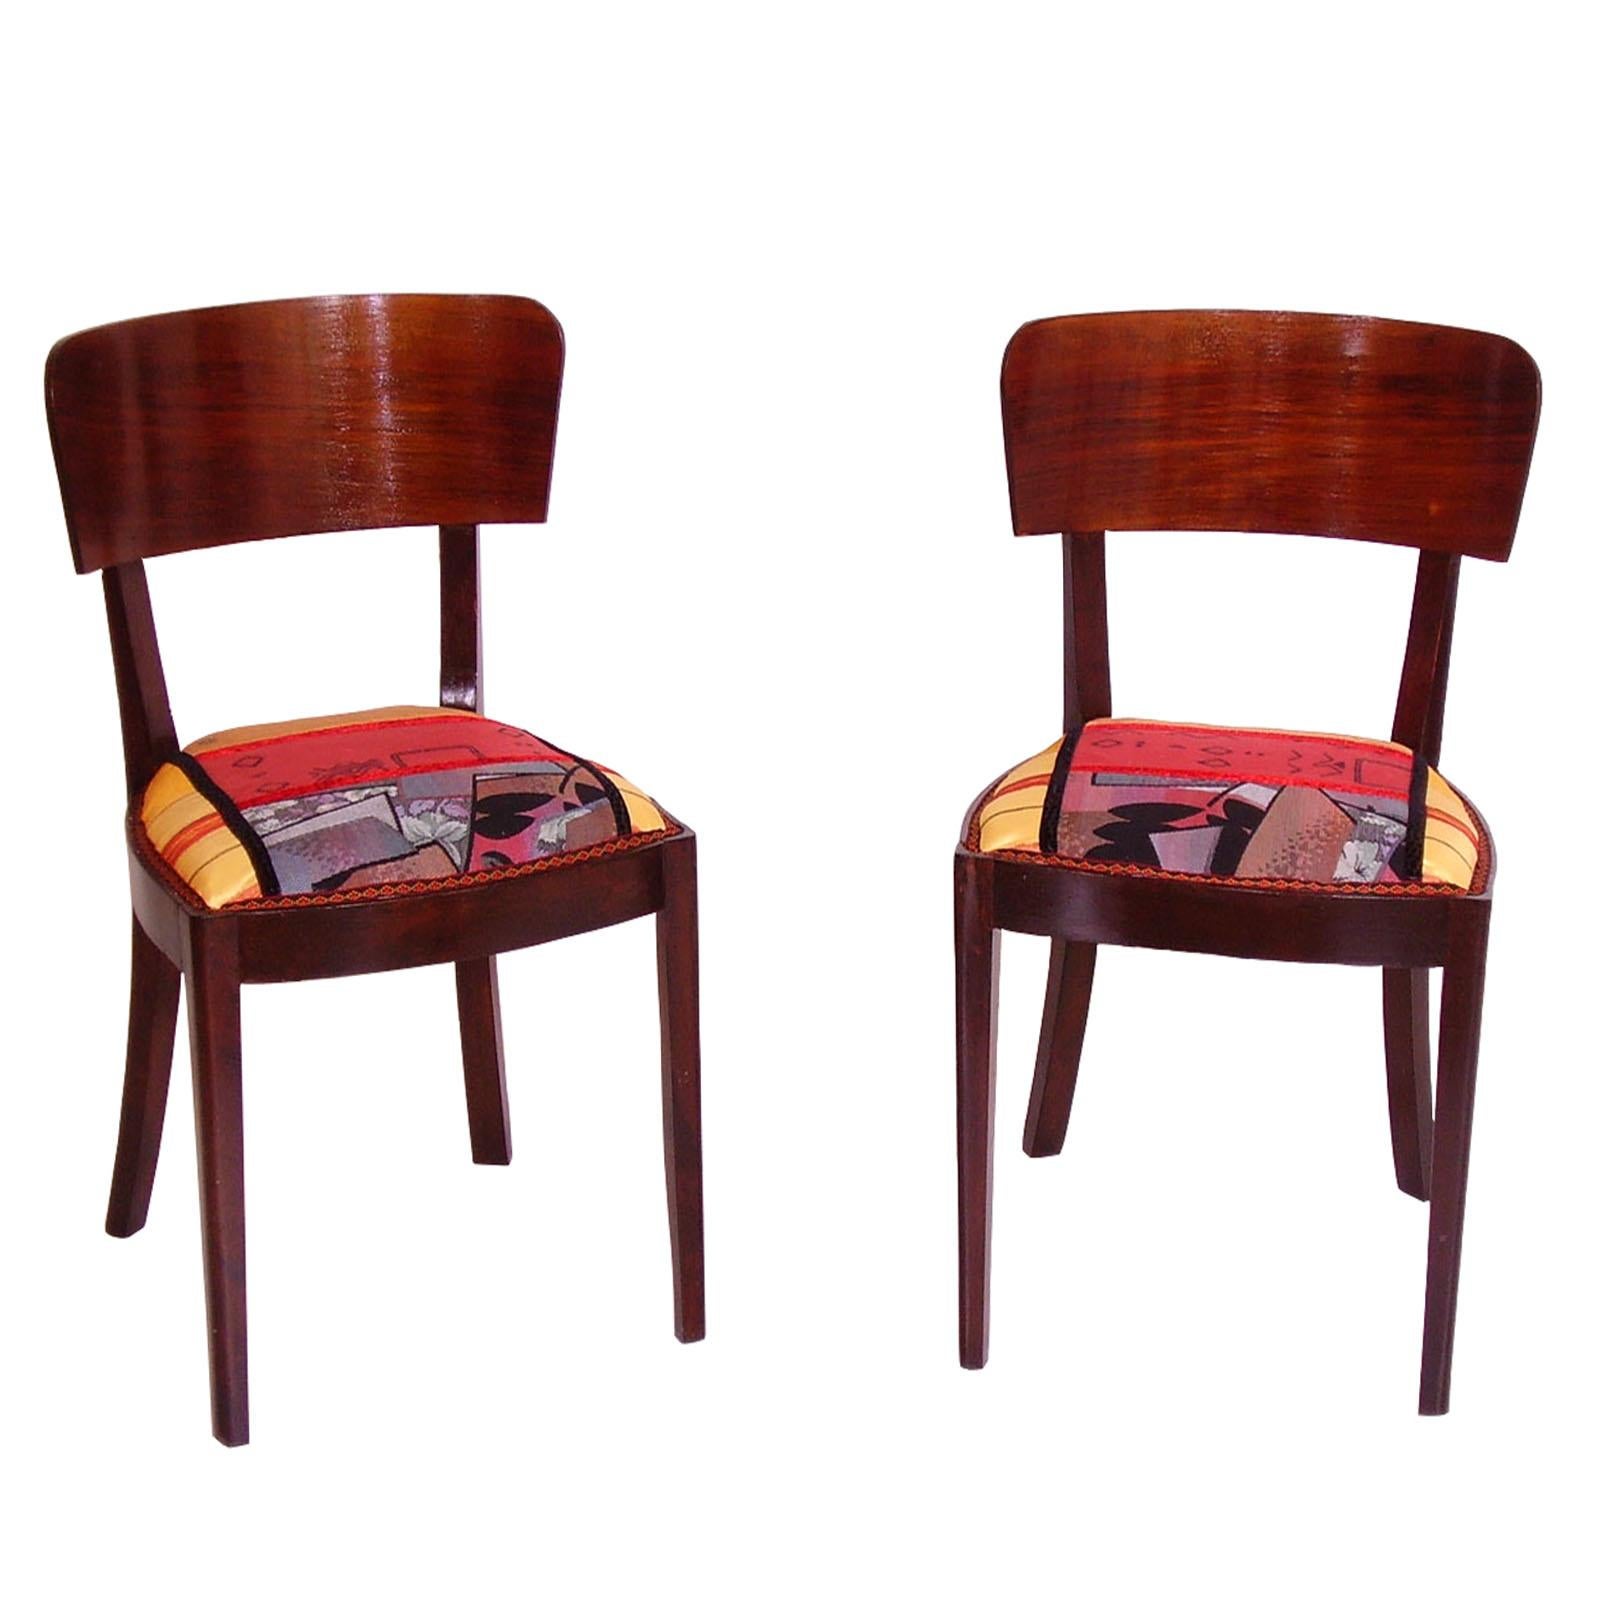 1920s Art Deco Side Chairs in Walnut, Original Sitting with Abstract Upholstery For Sale